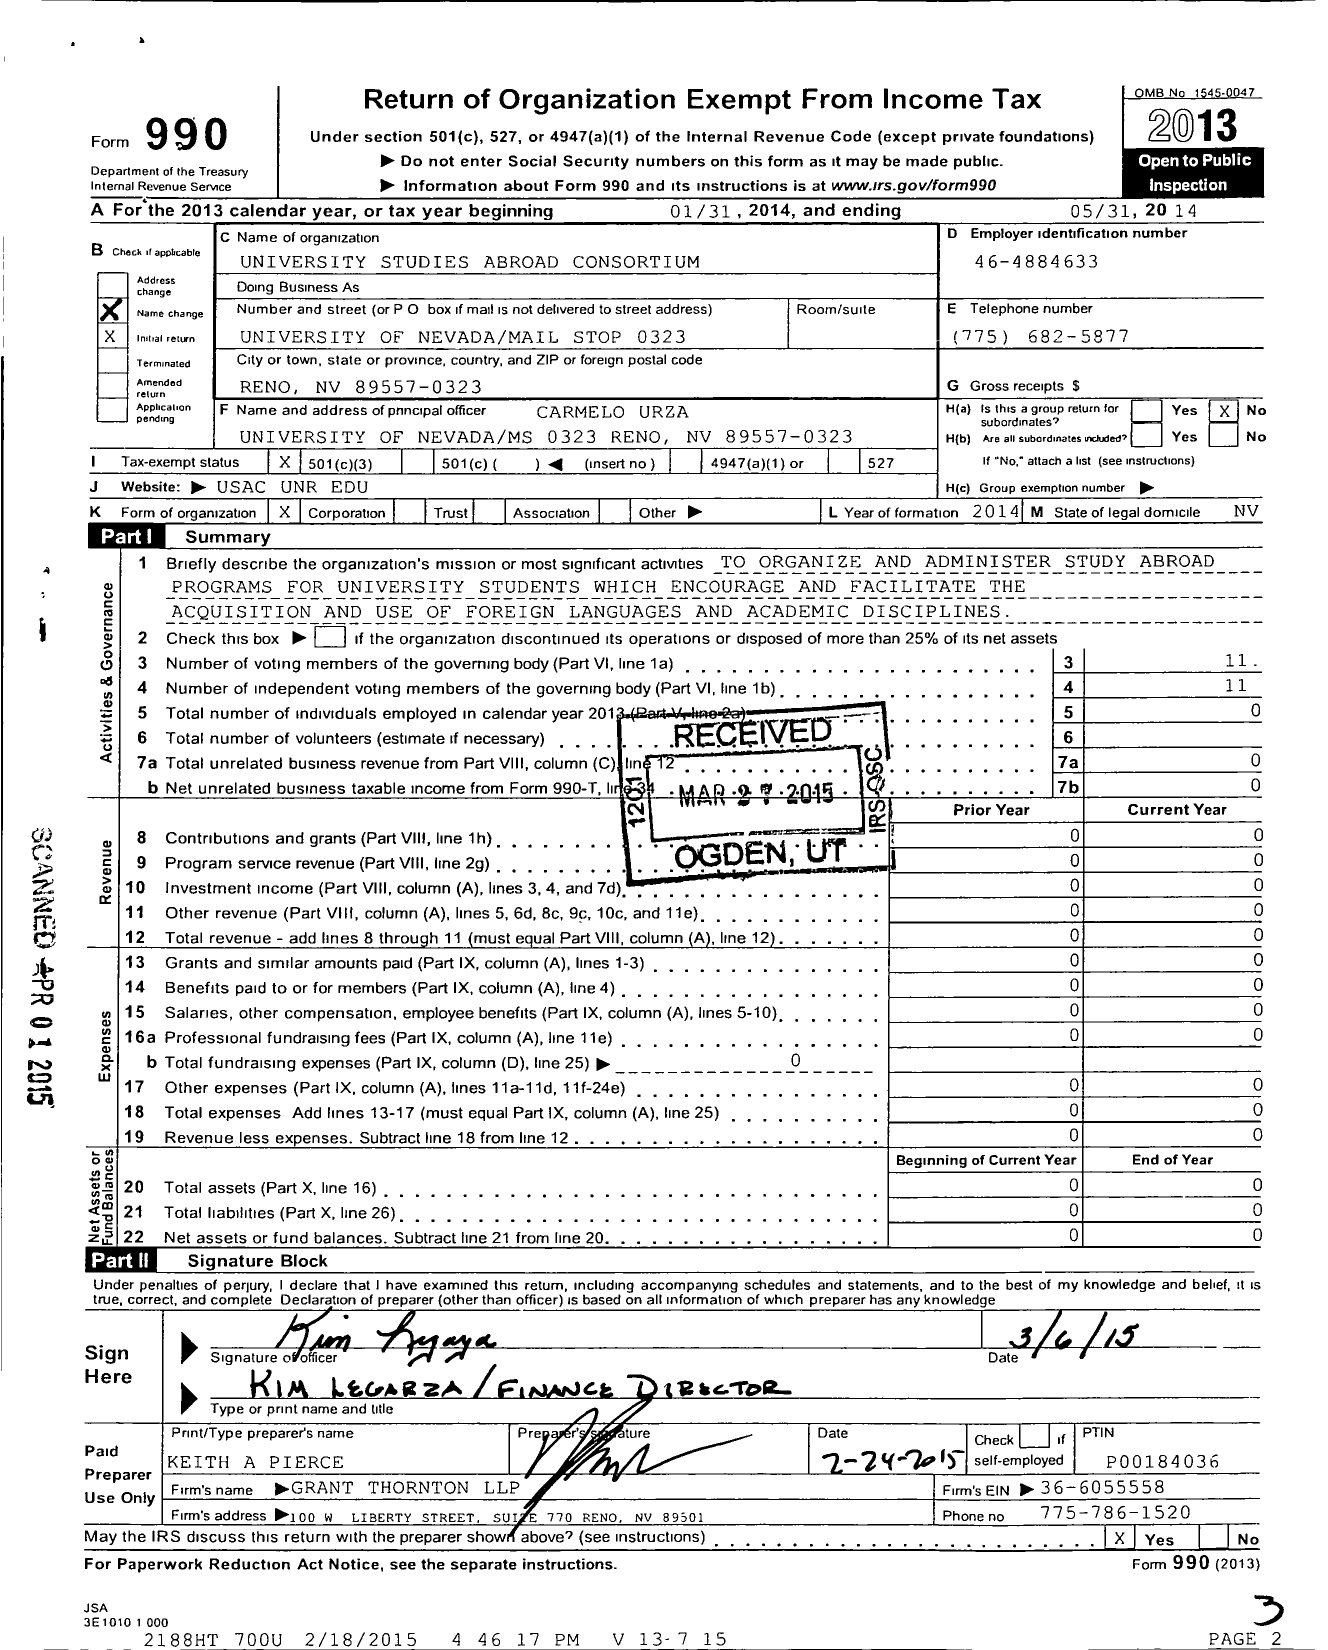 Image of first page of 2013 Form 990 for University Studies Abroad Consortium (USAC)